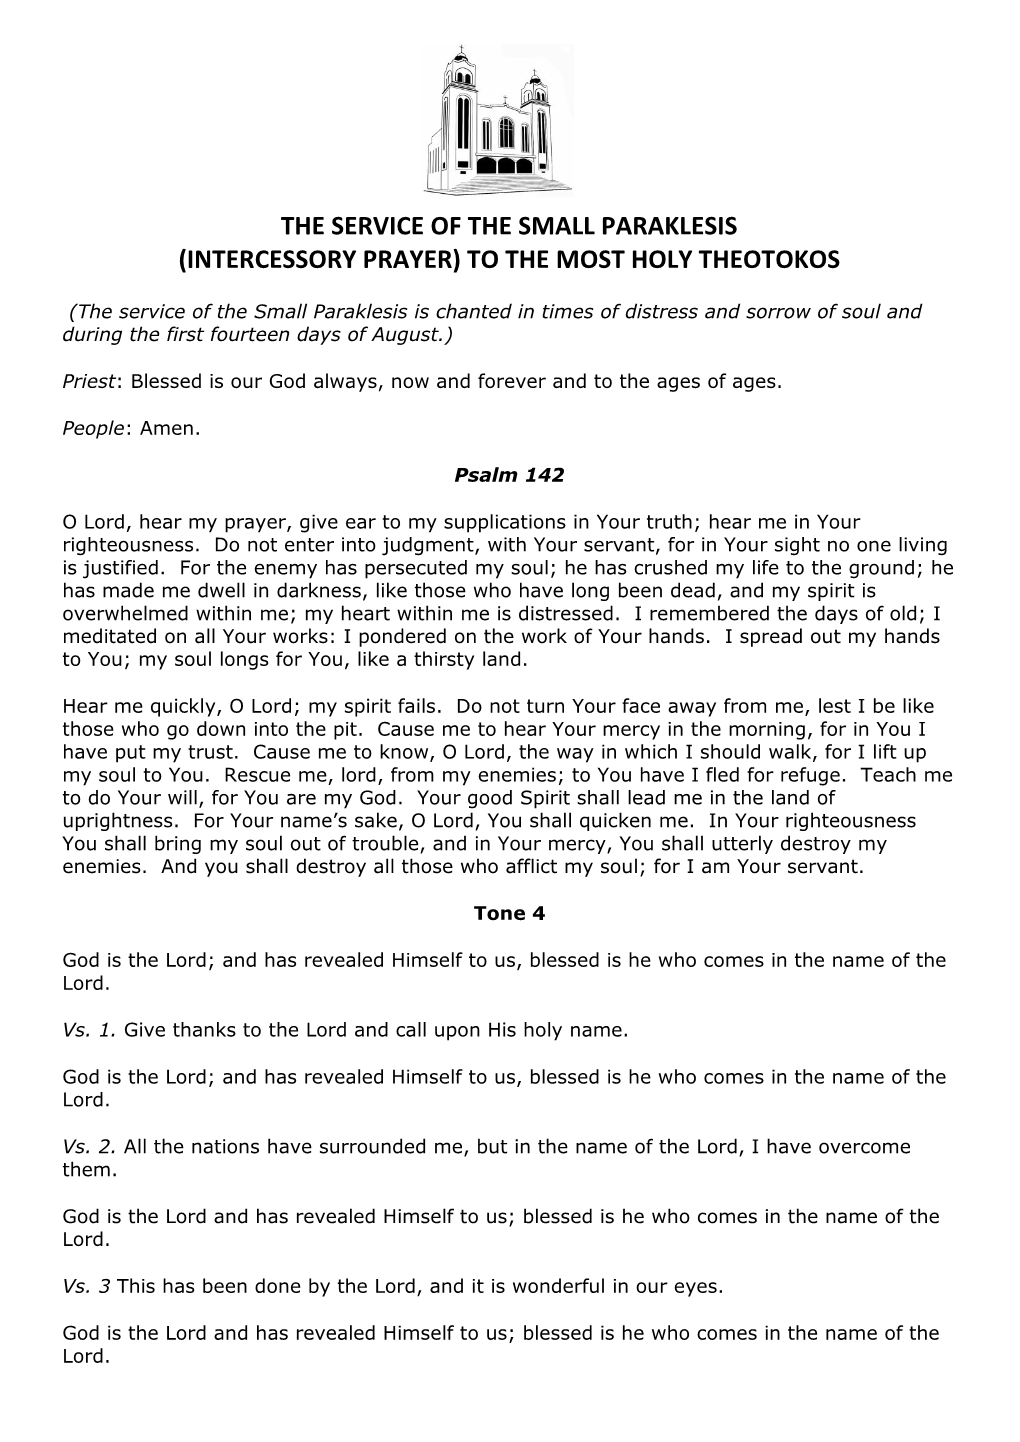 The Service of the Small Paraklesis (Intercessory Prayer) to the Most Holy Theotokos